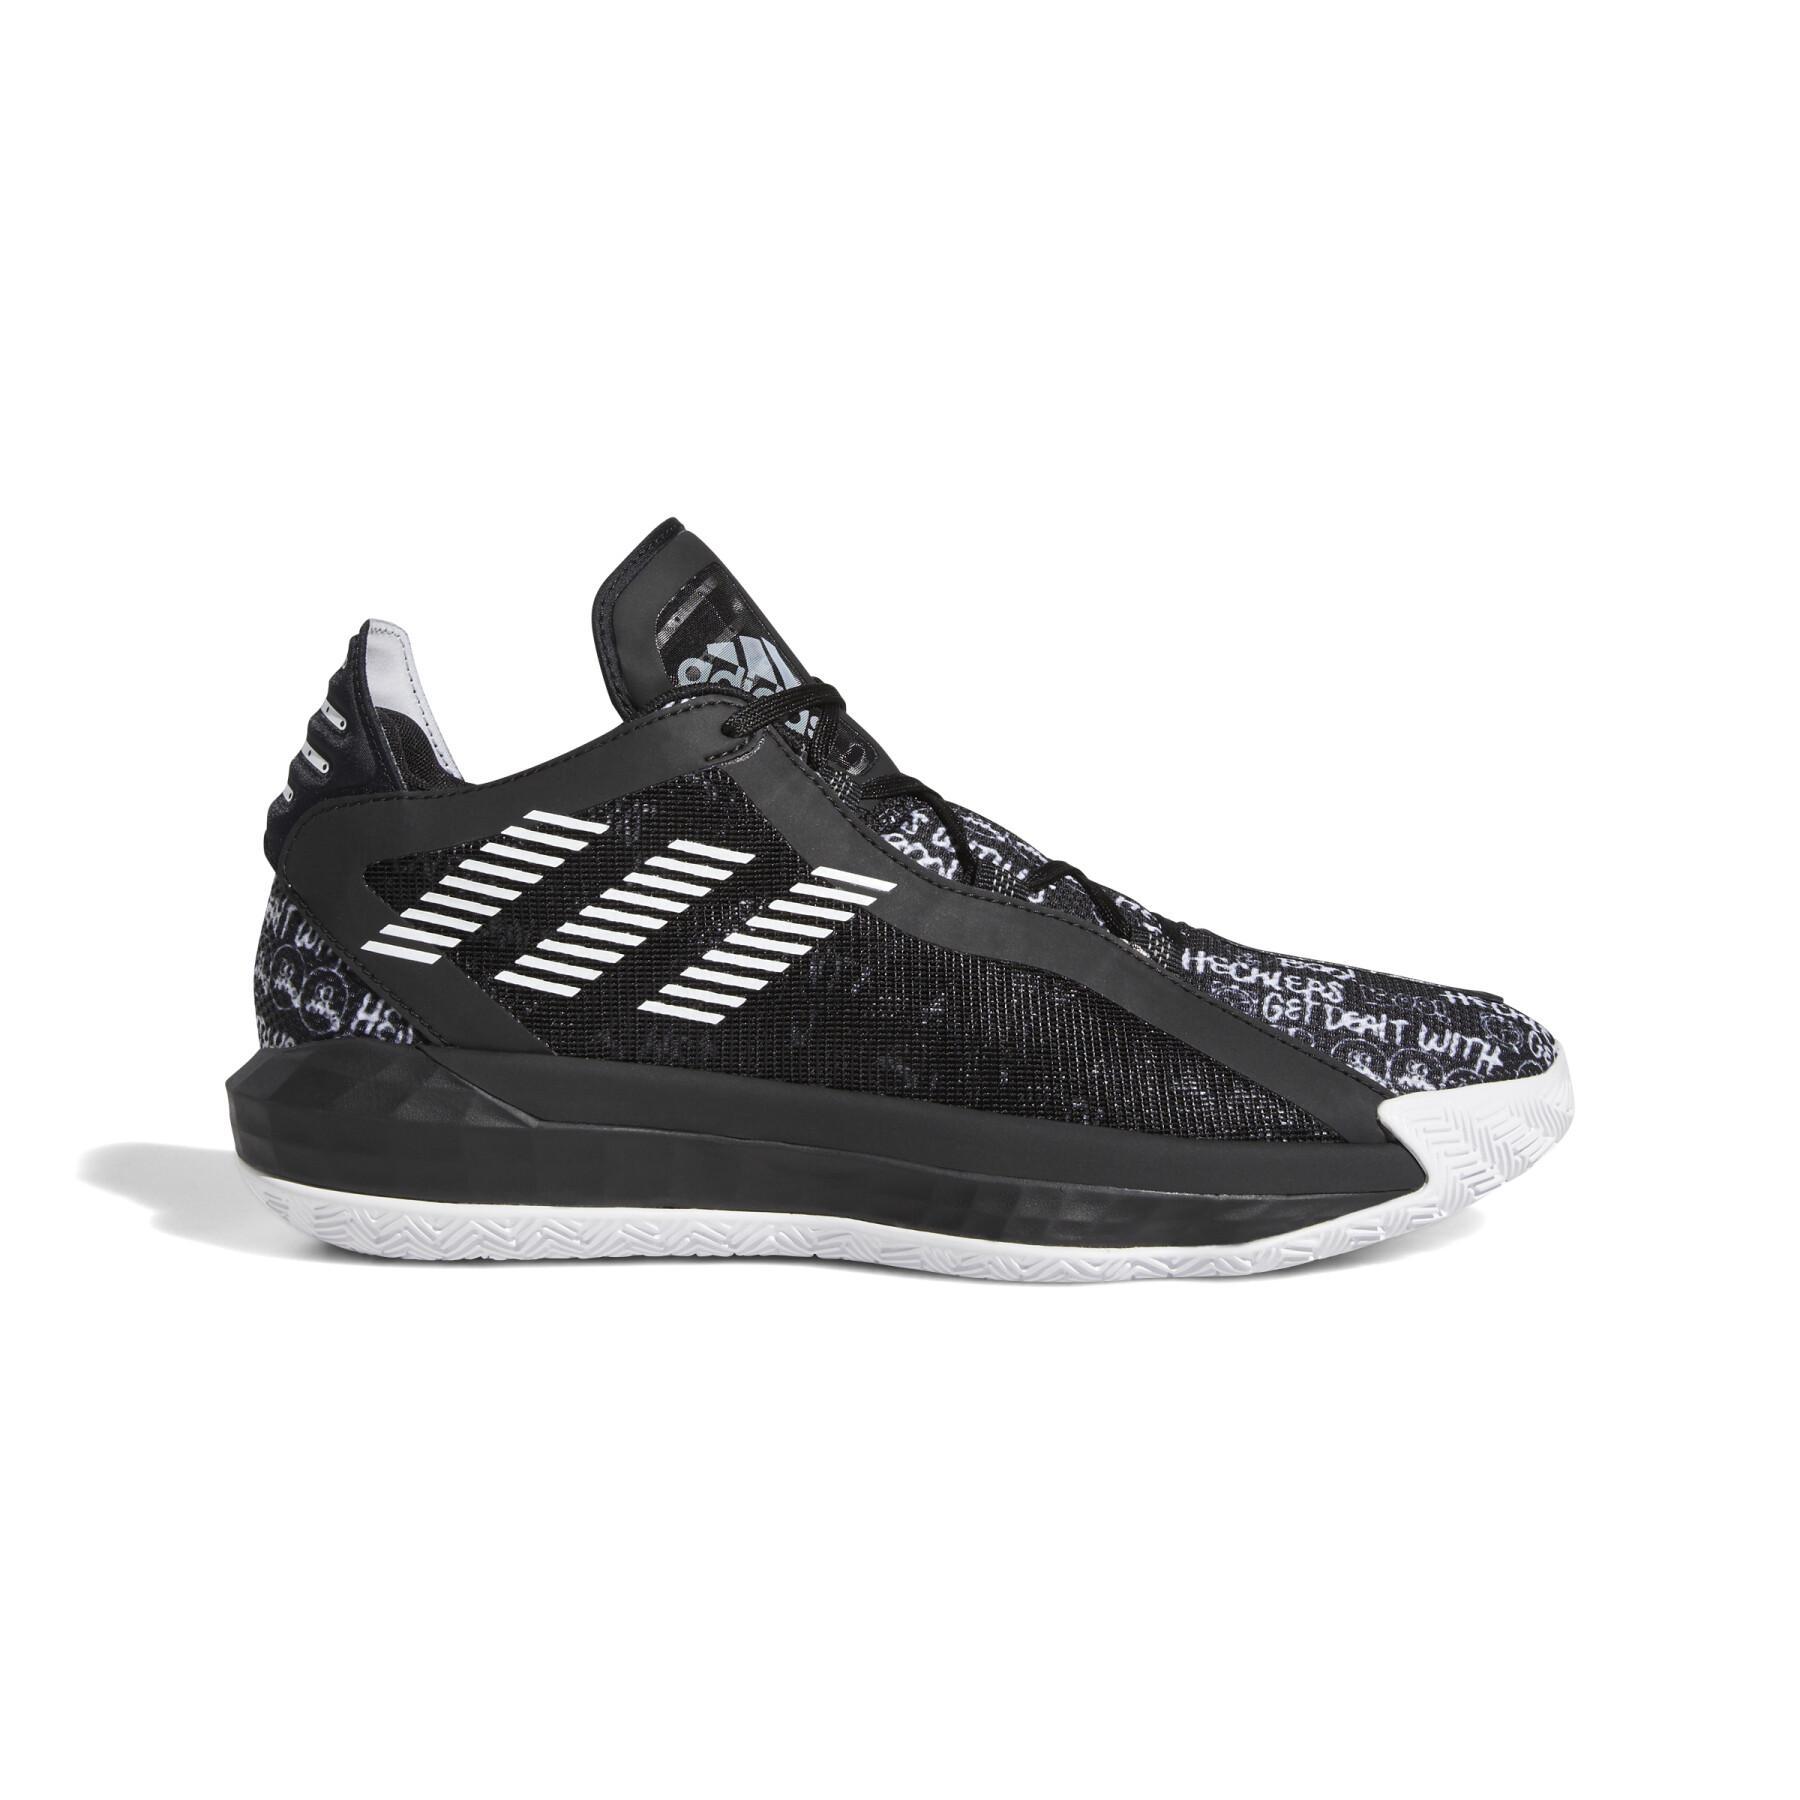 Indoor shoes adidas Dame 6